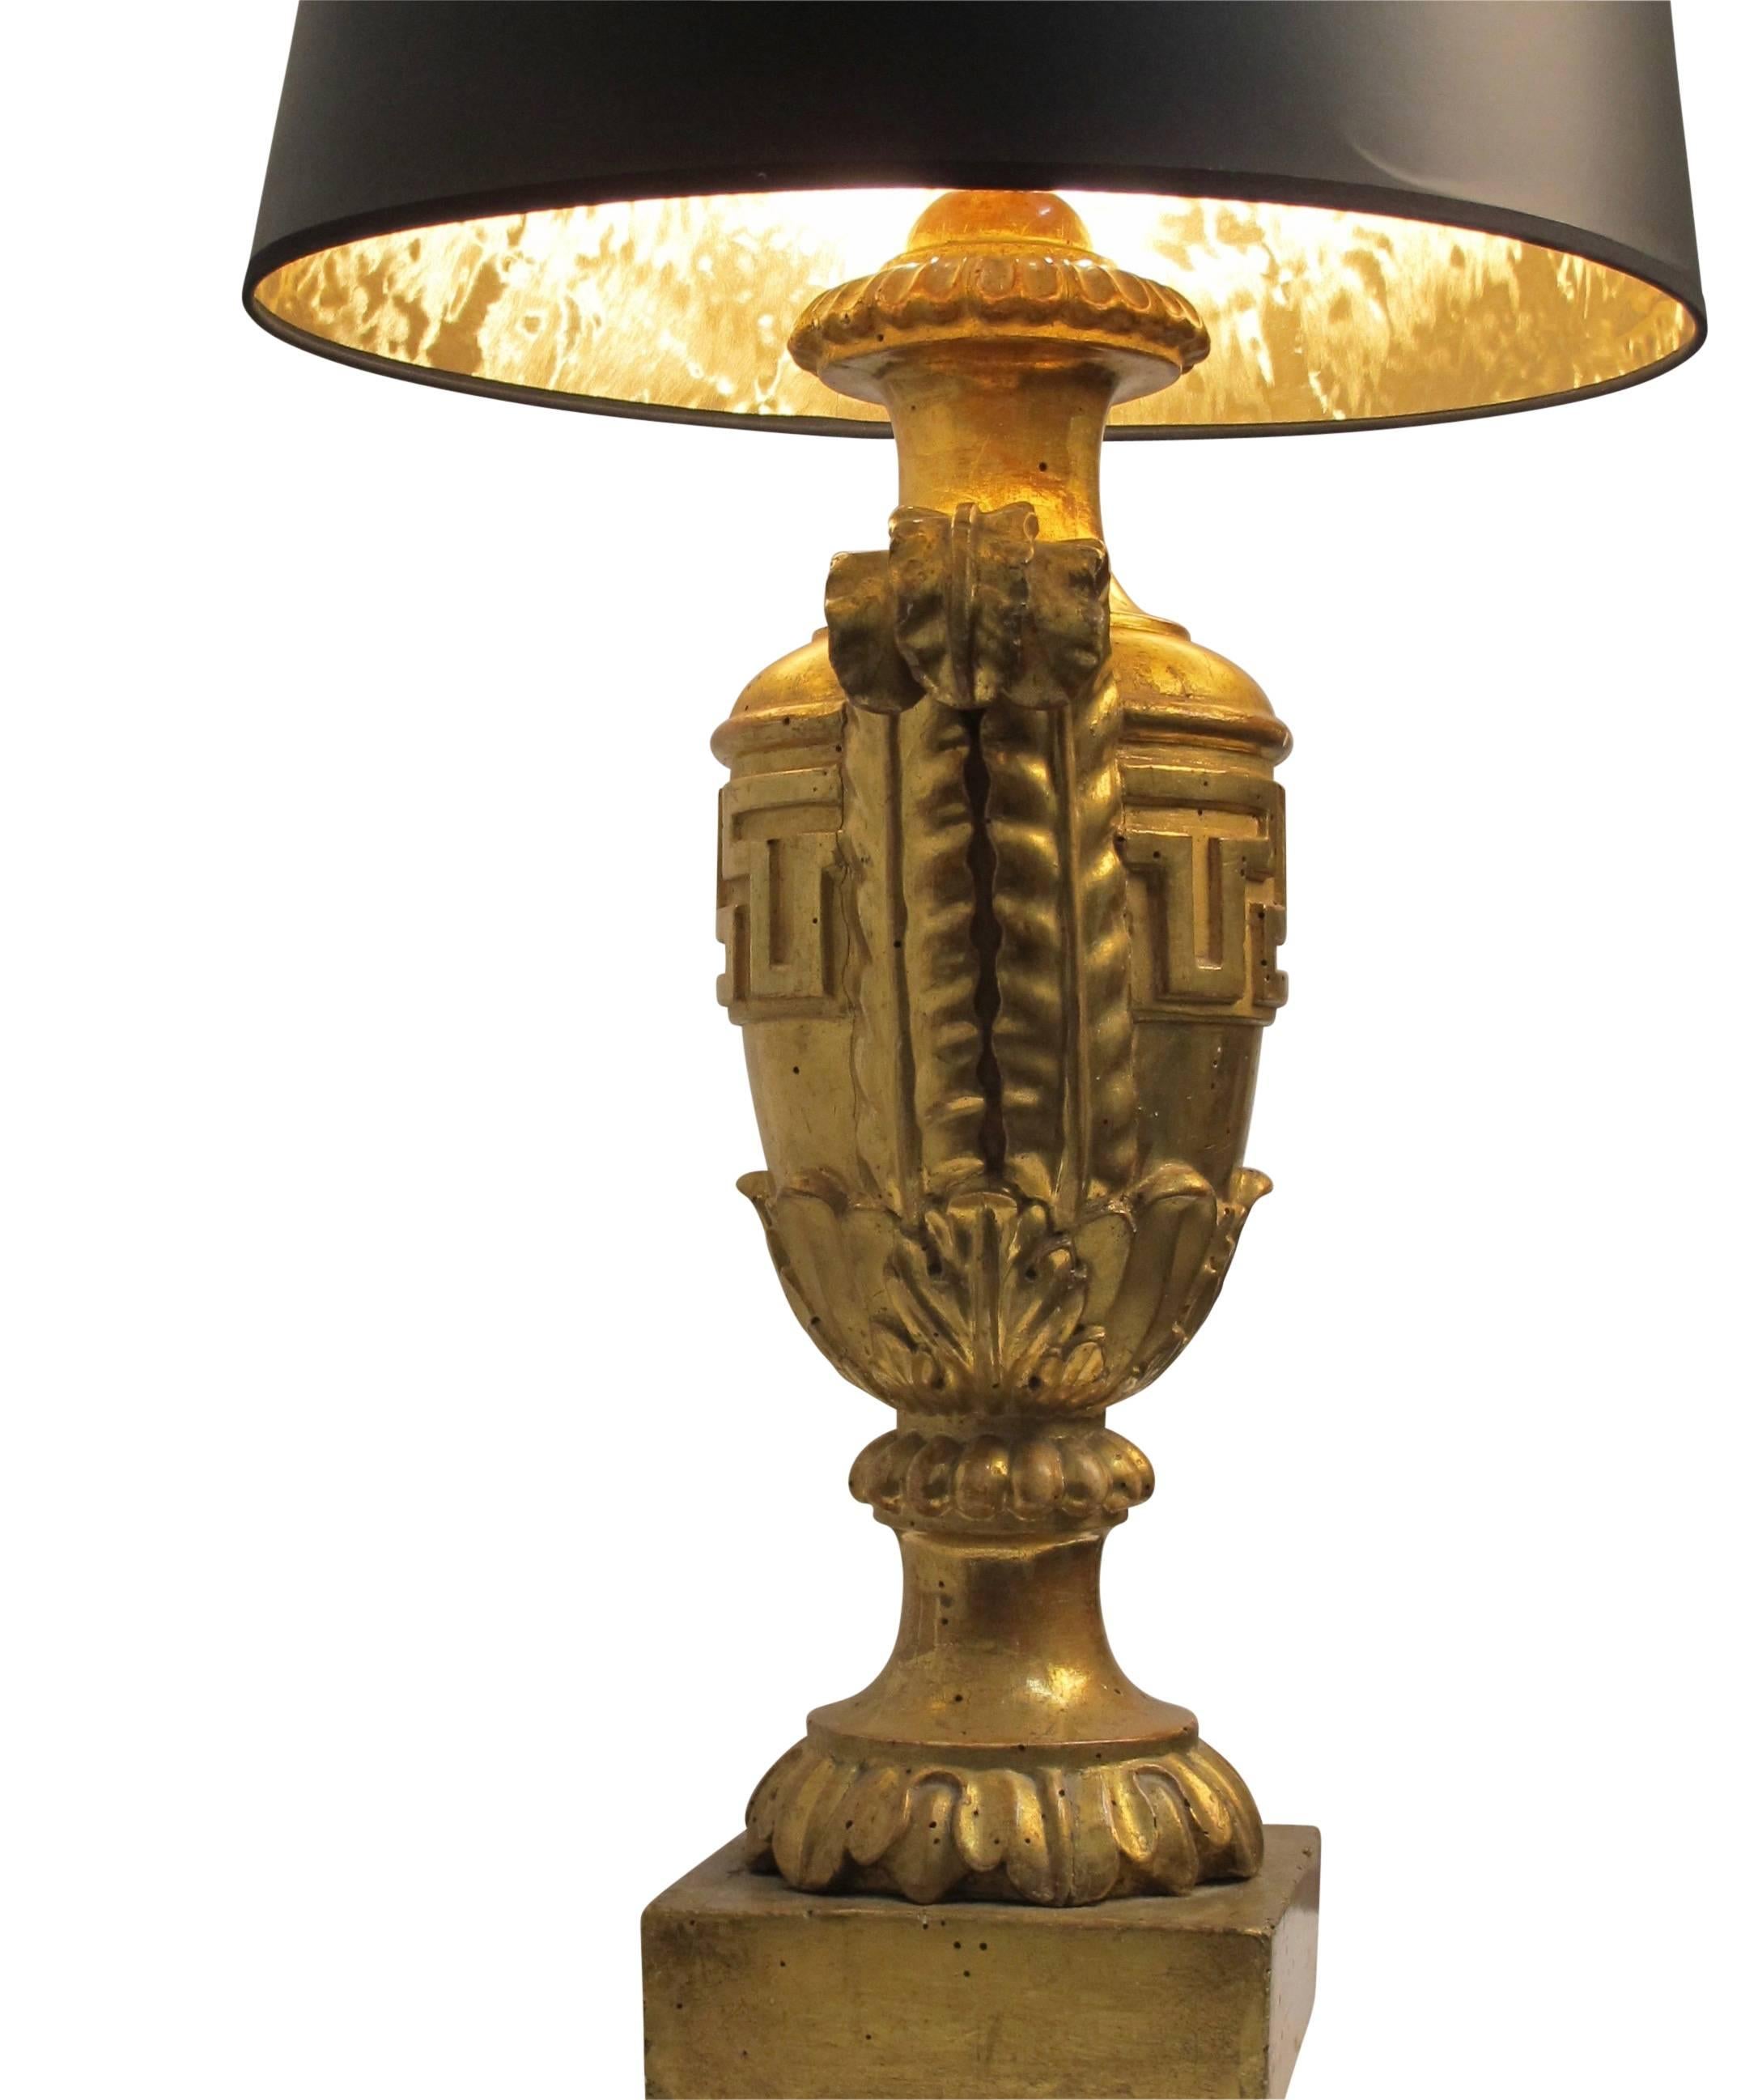 Carved Wood and Gilt Urn Shape Lamp, Italian, Early 19th Century For Sale 4